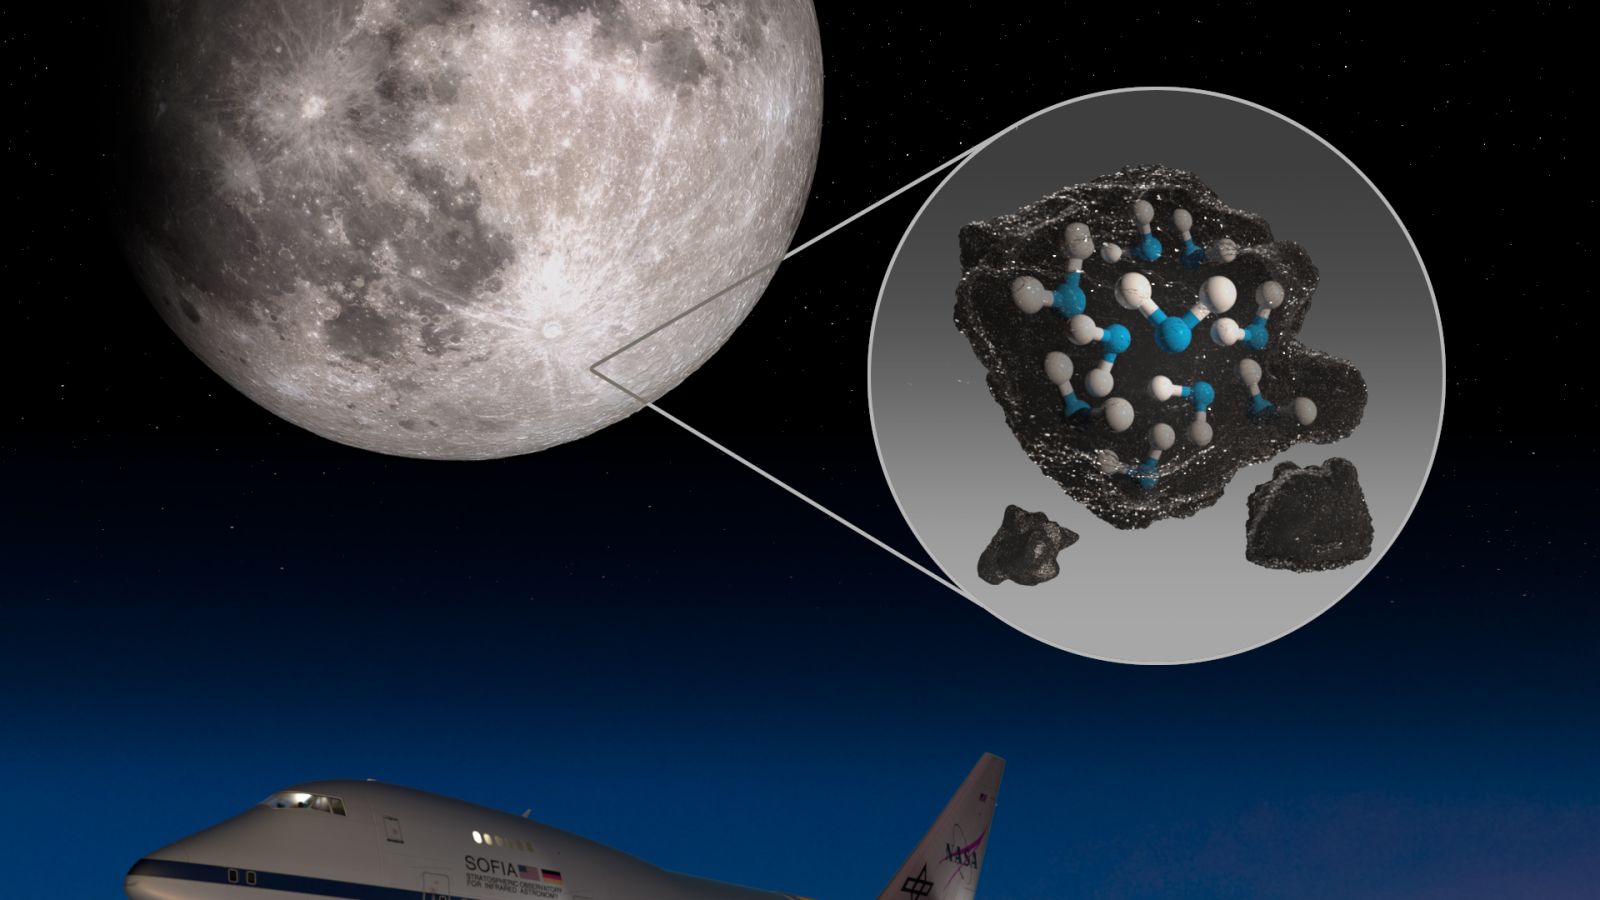 Illustration for article titled NASAs high-flying SOFIA telescope confirms water on bright side of the Moon